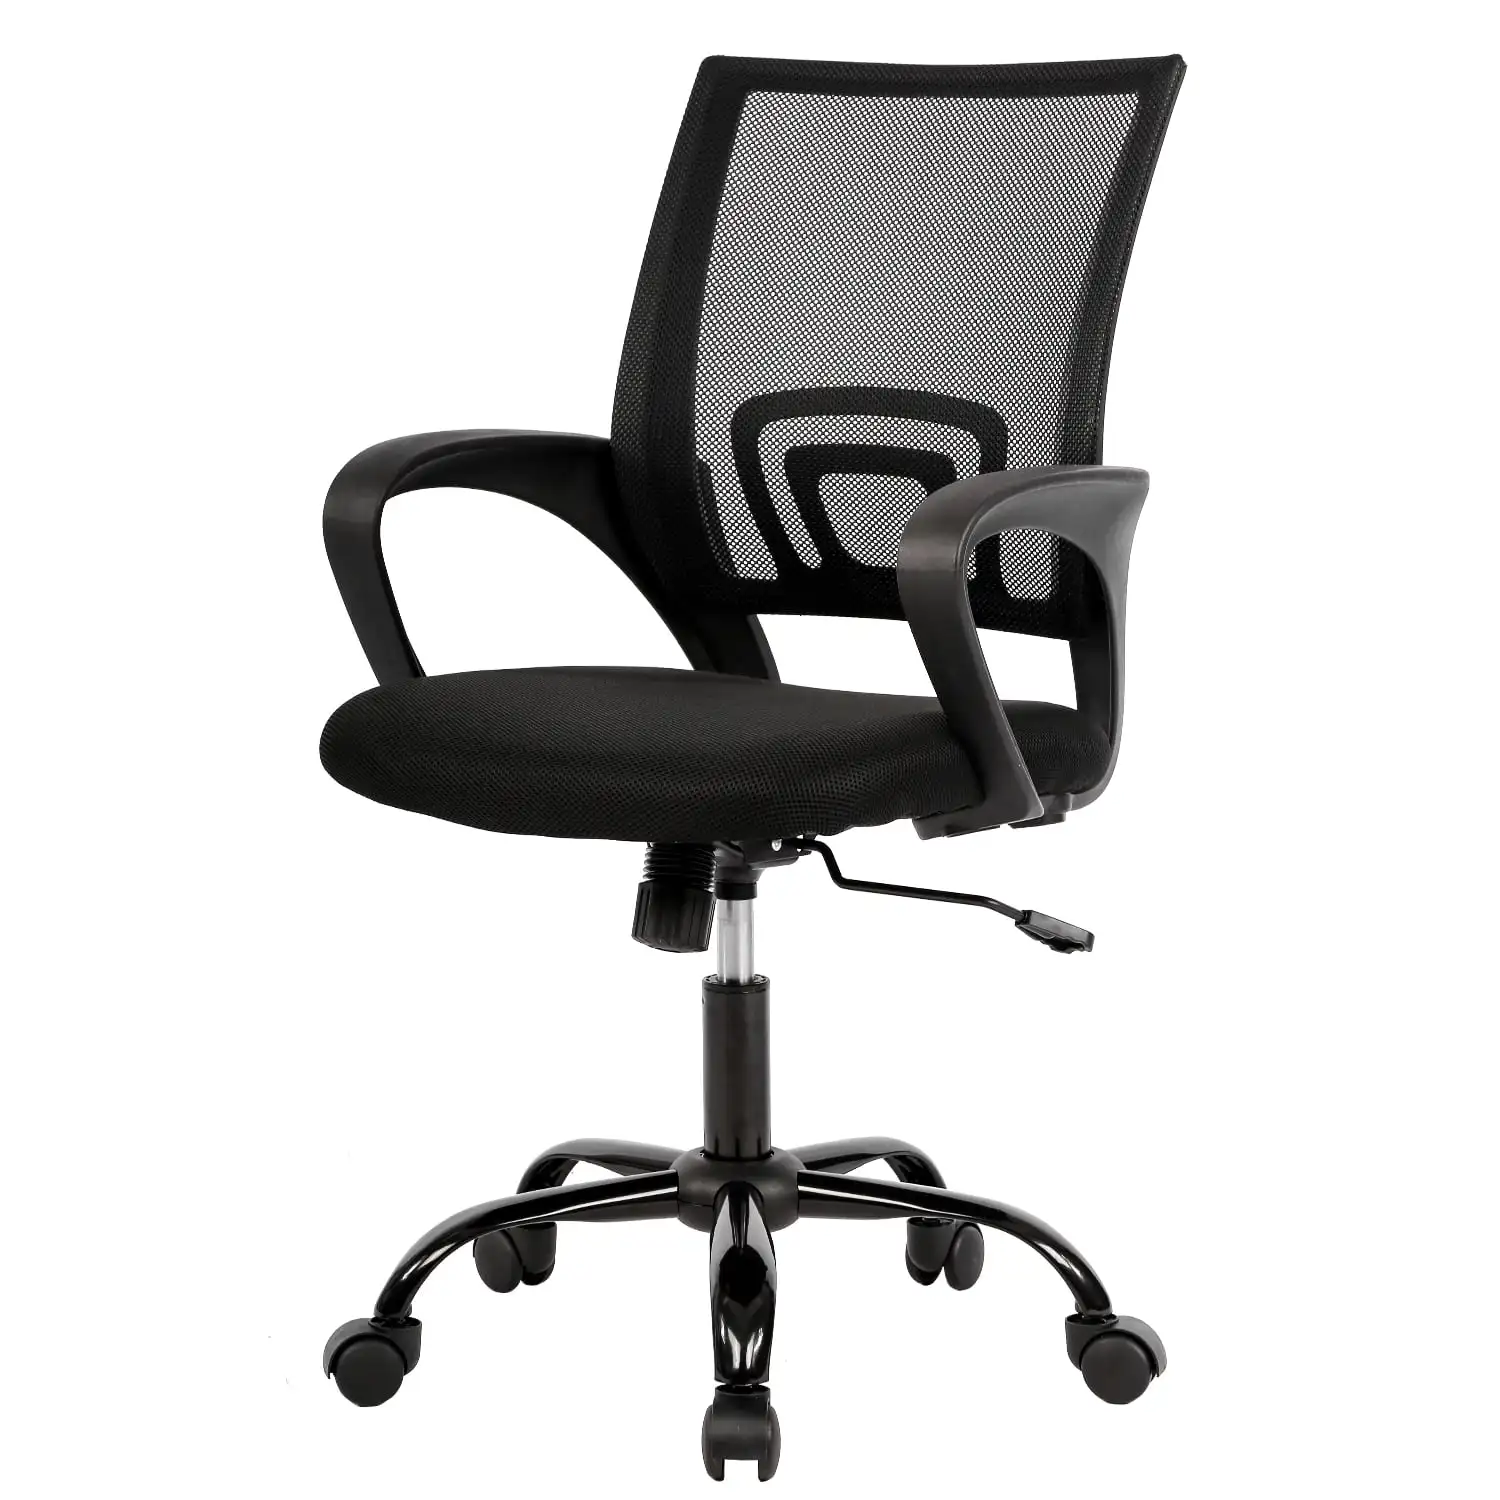 

BestOffice Mesh Office Chair Desk Chair Computer Chair Ergonomic Adjustable Stool Back Support Modern Executive Rolling S